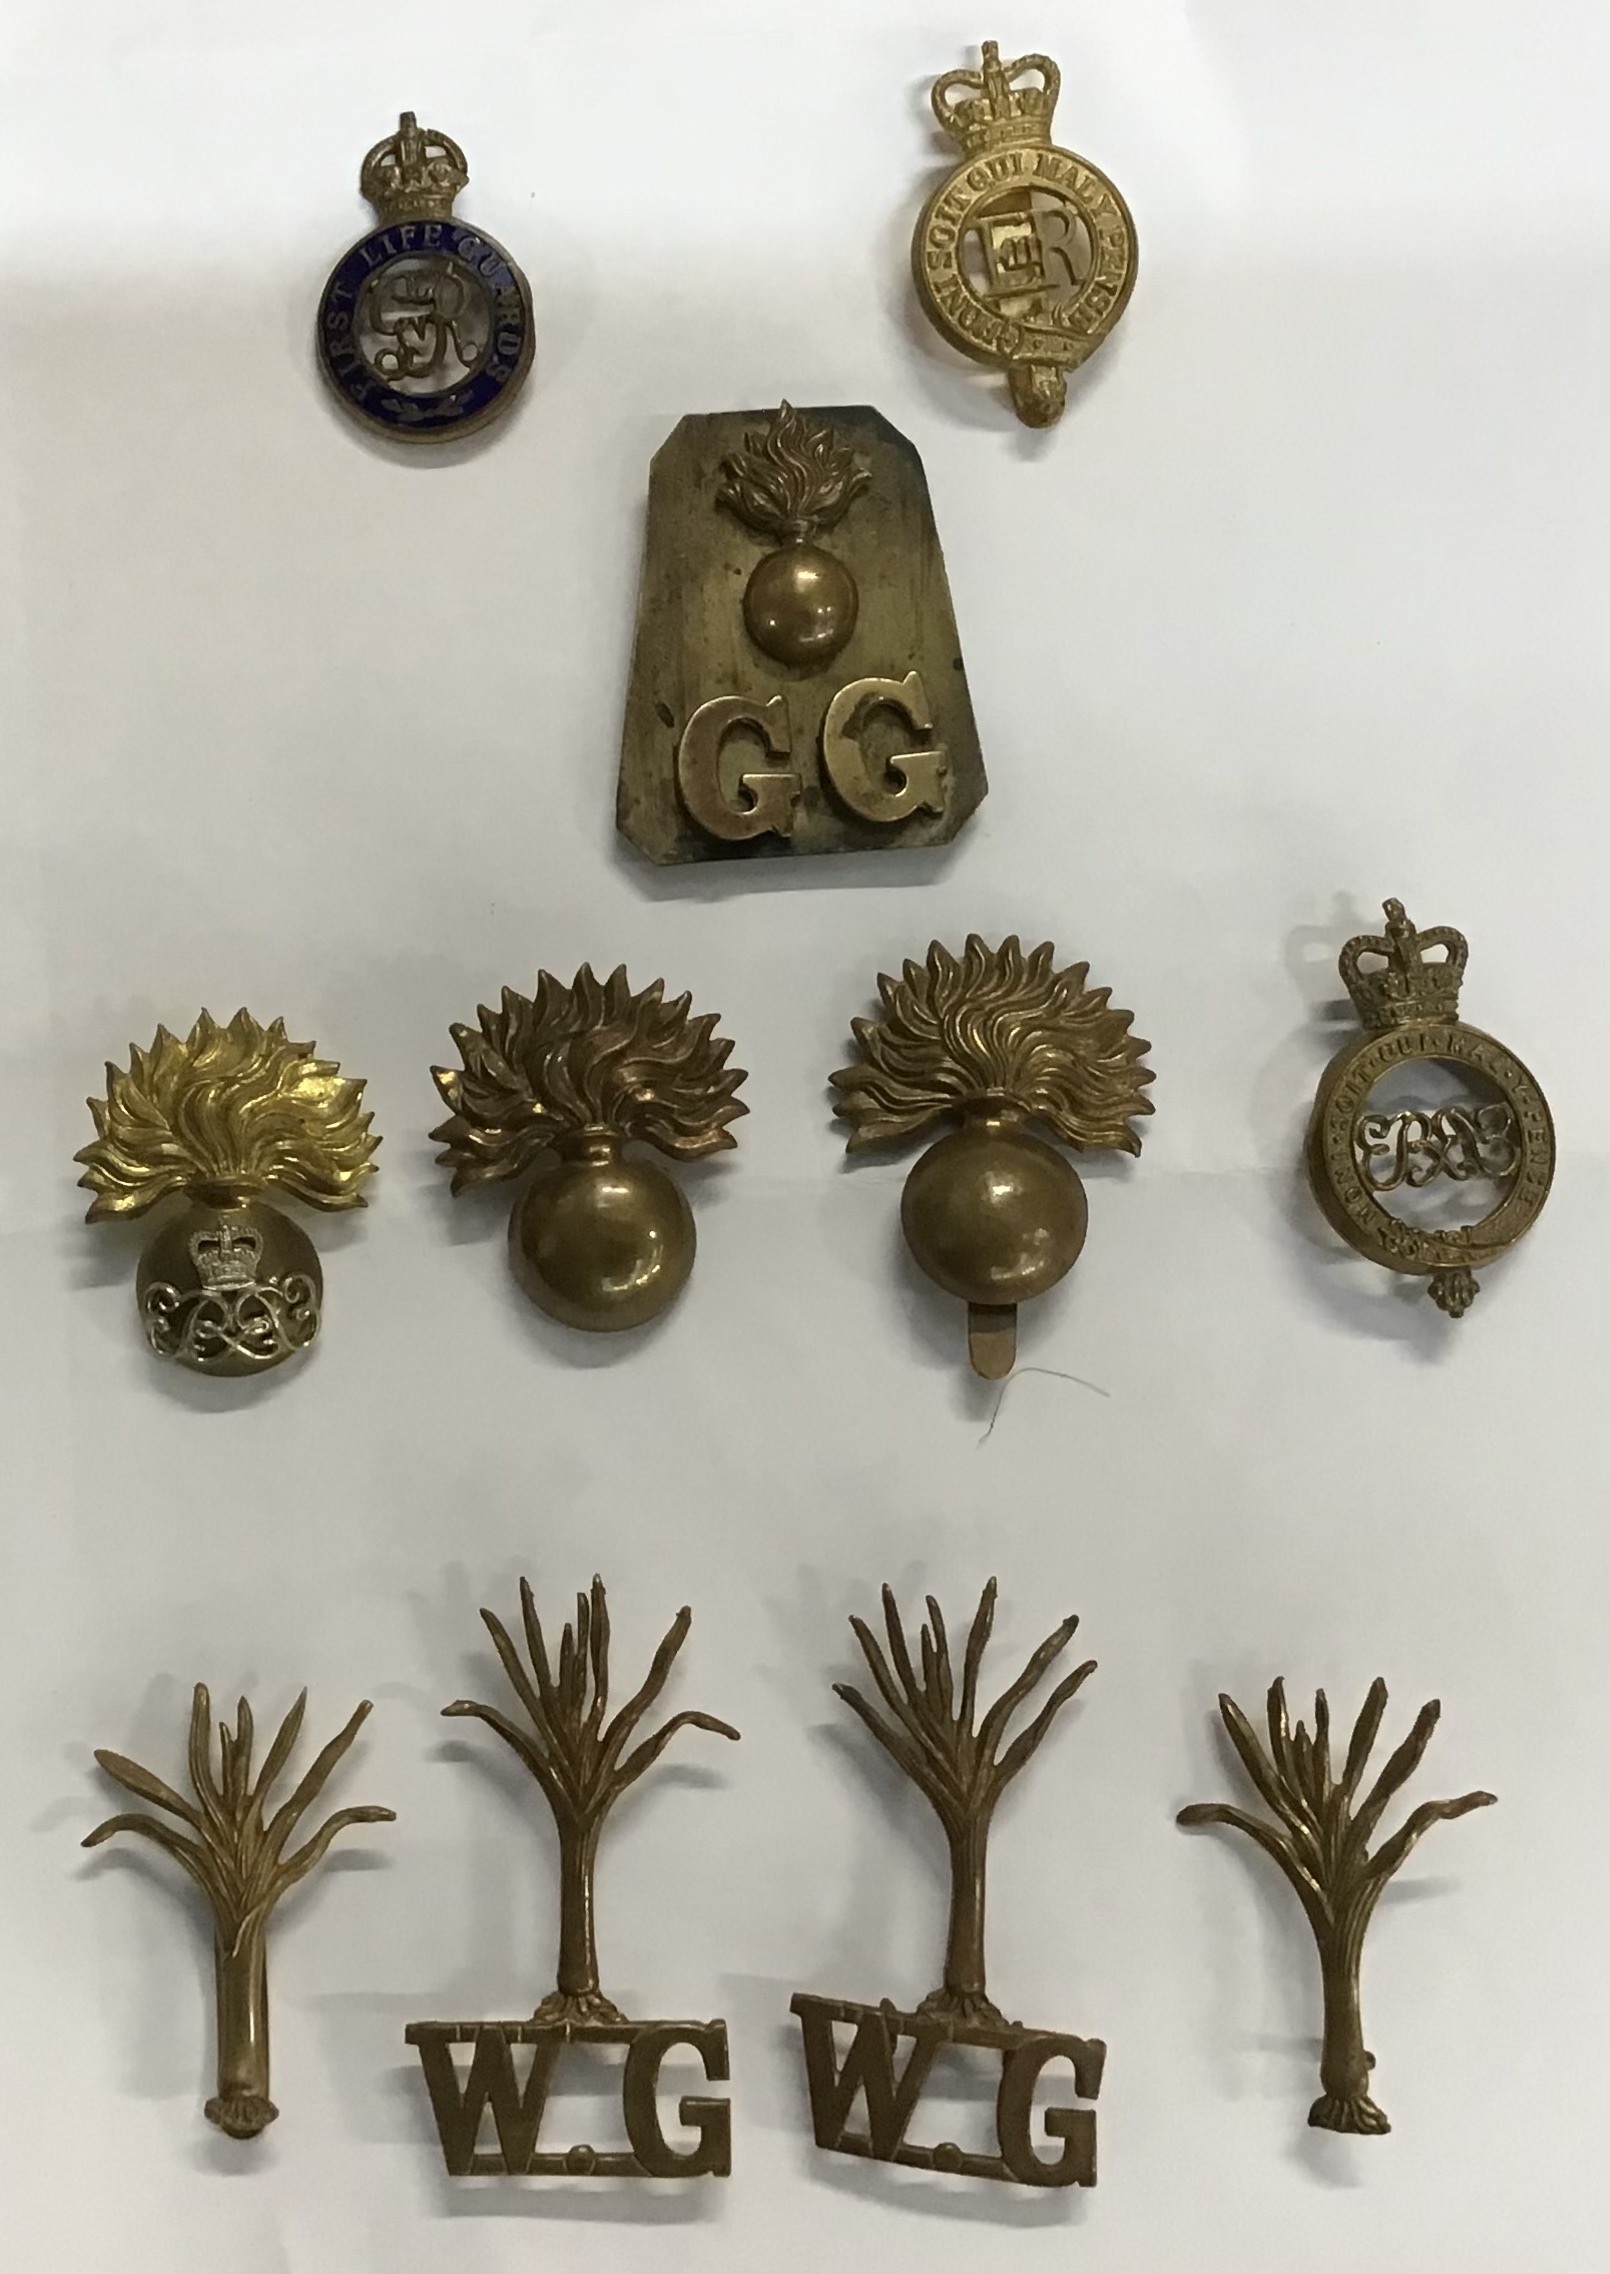 Collection of British Army Guards Uniform badges, includes First Life Guards, Grenadier Guards, - Image 3 of 3